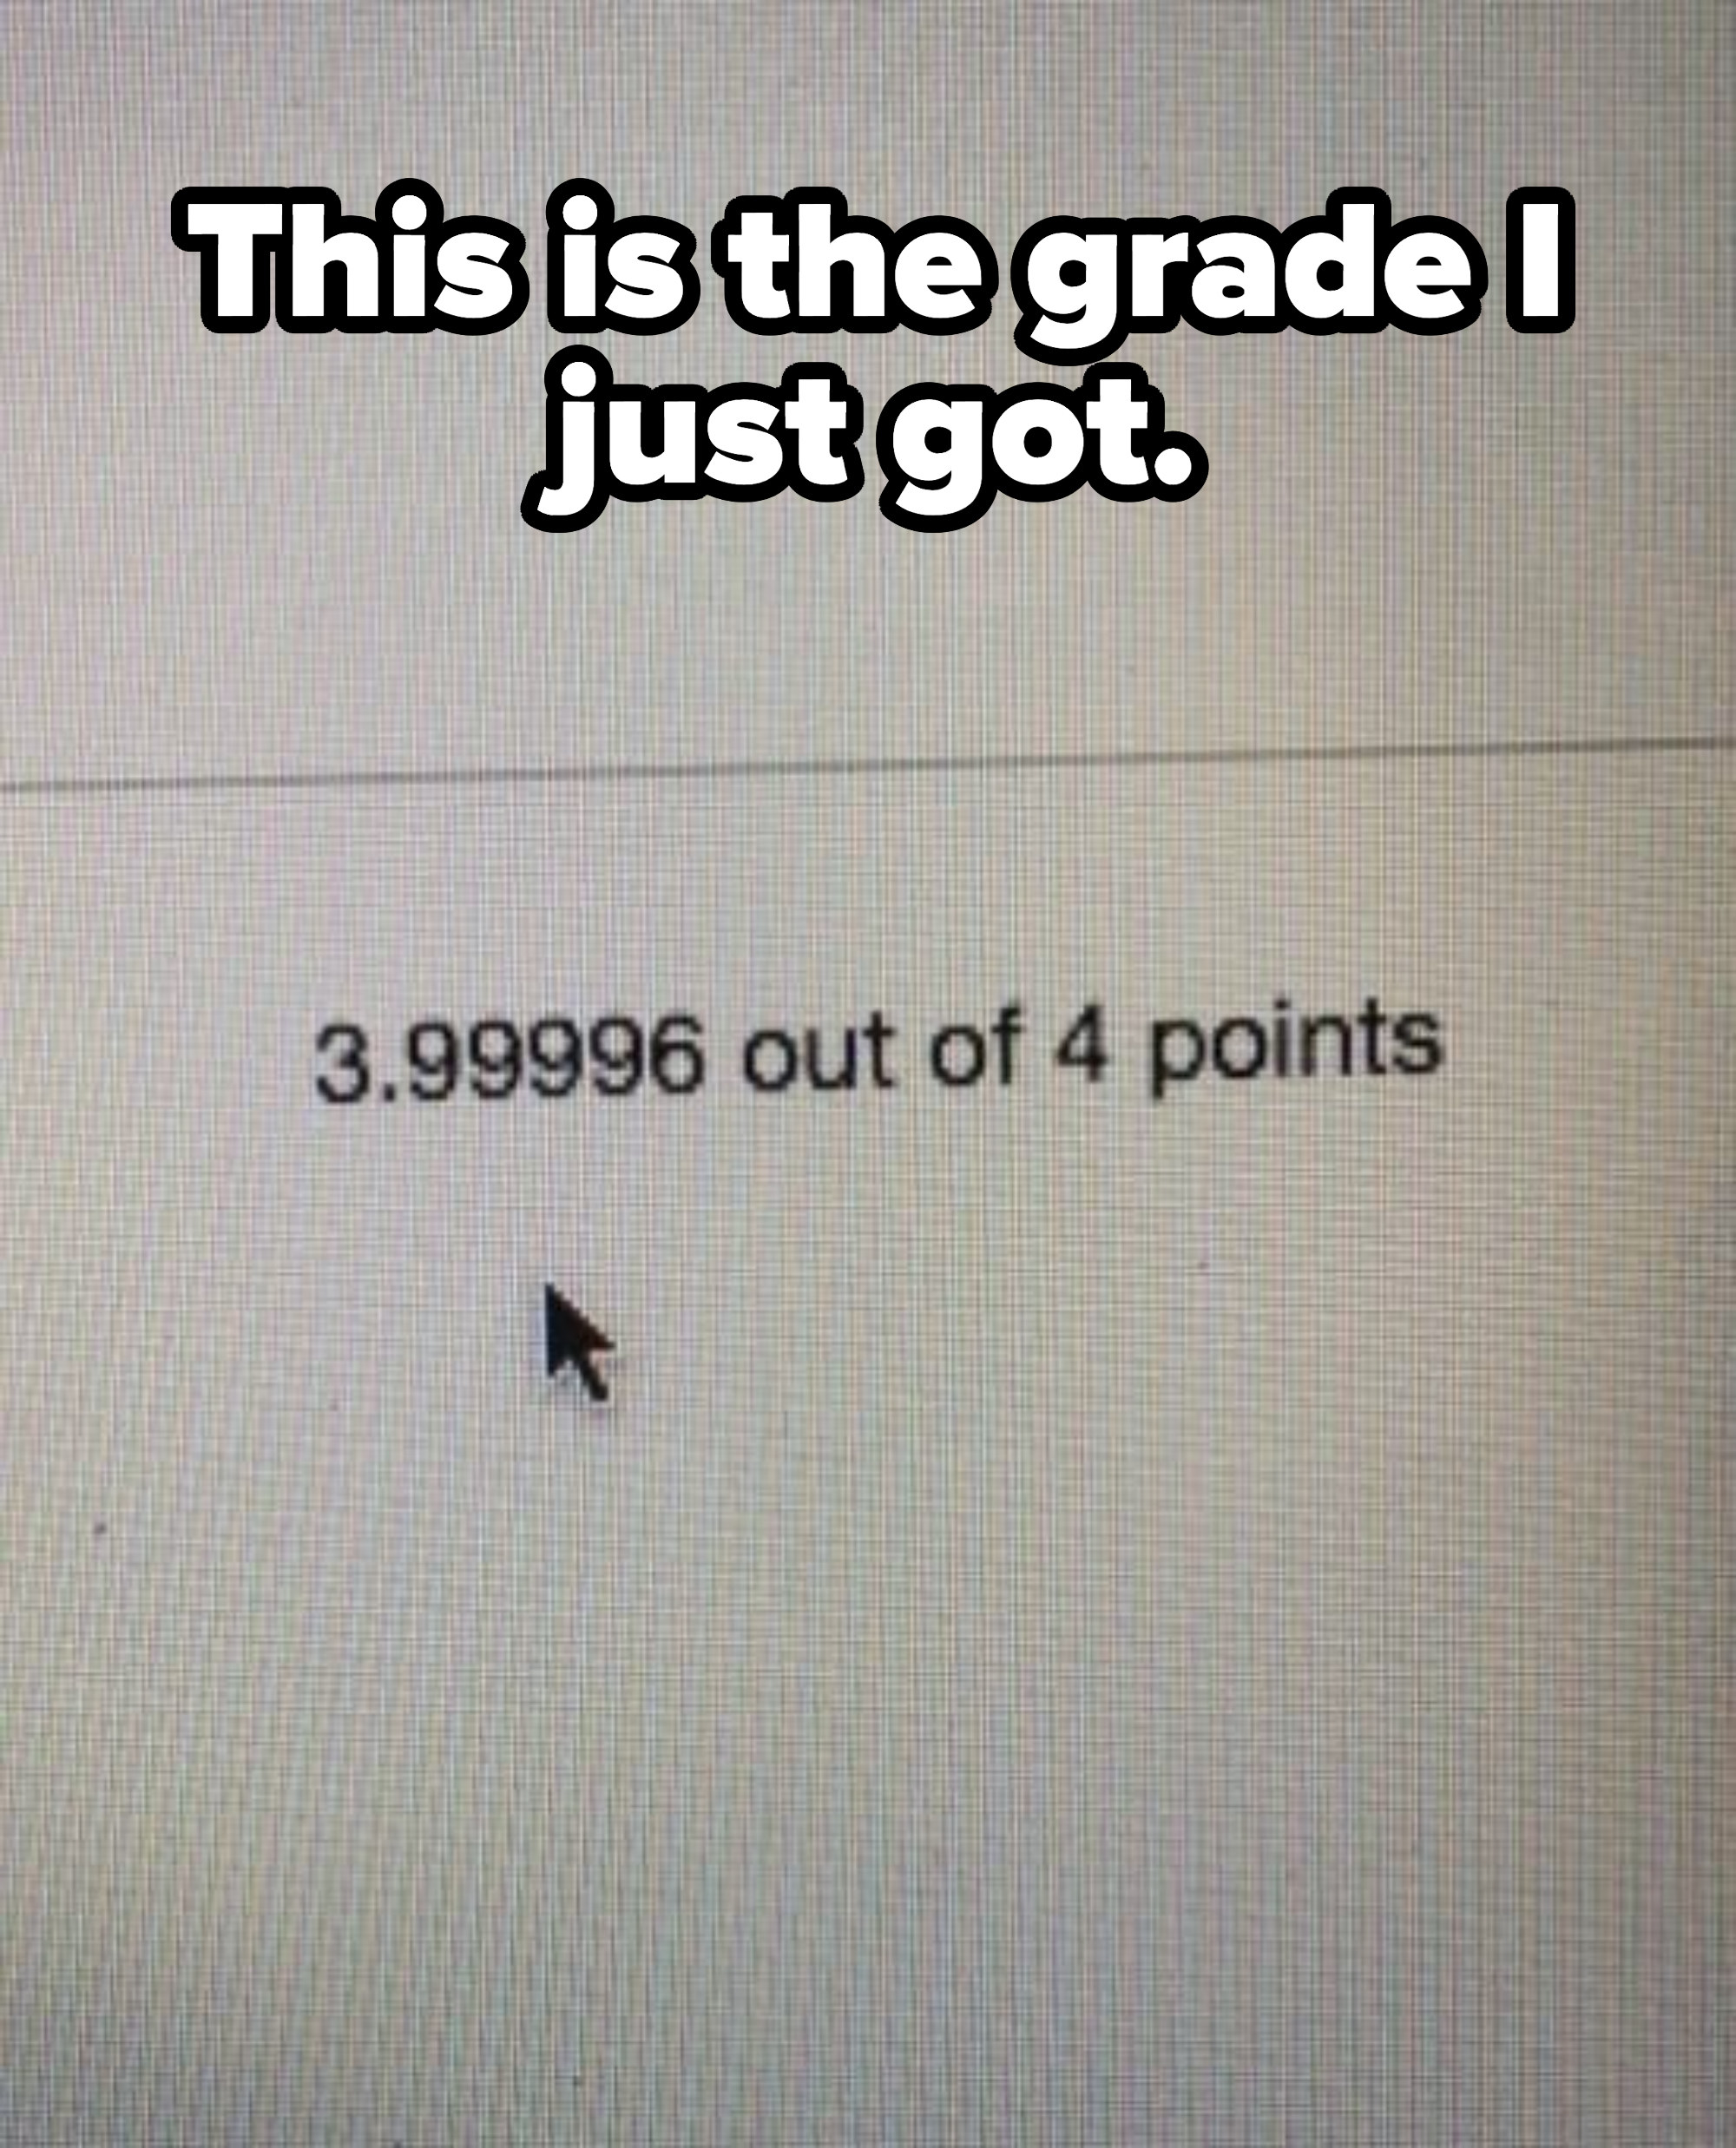 grade that is 3.99996 out of 4